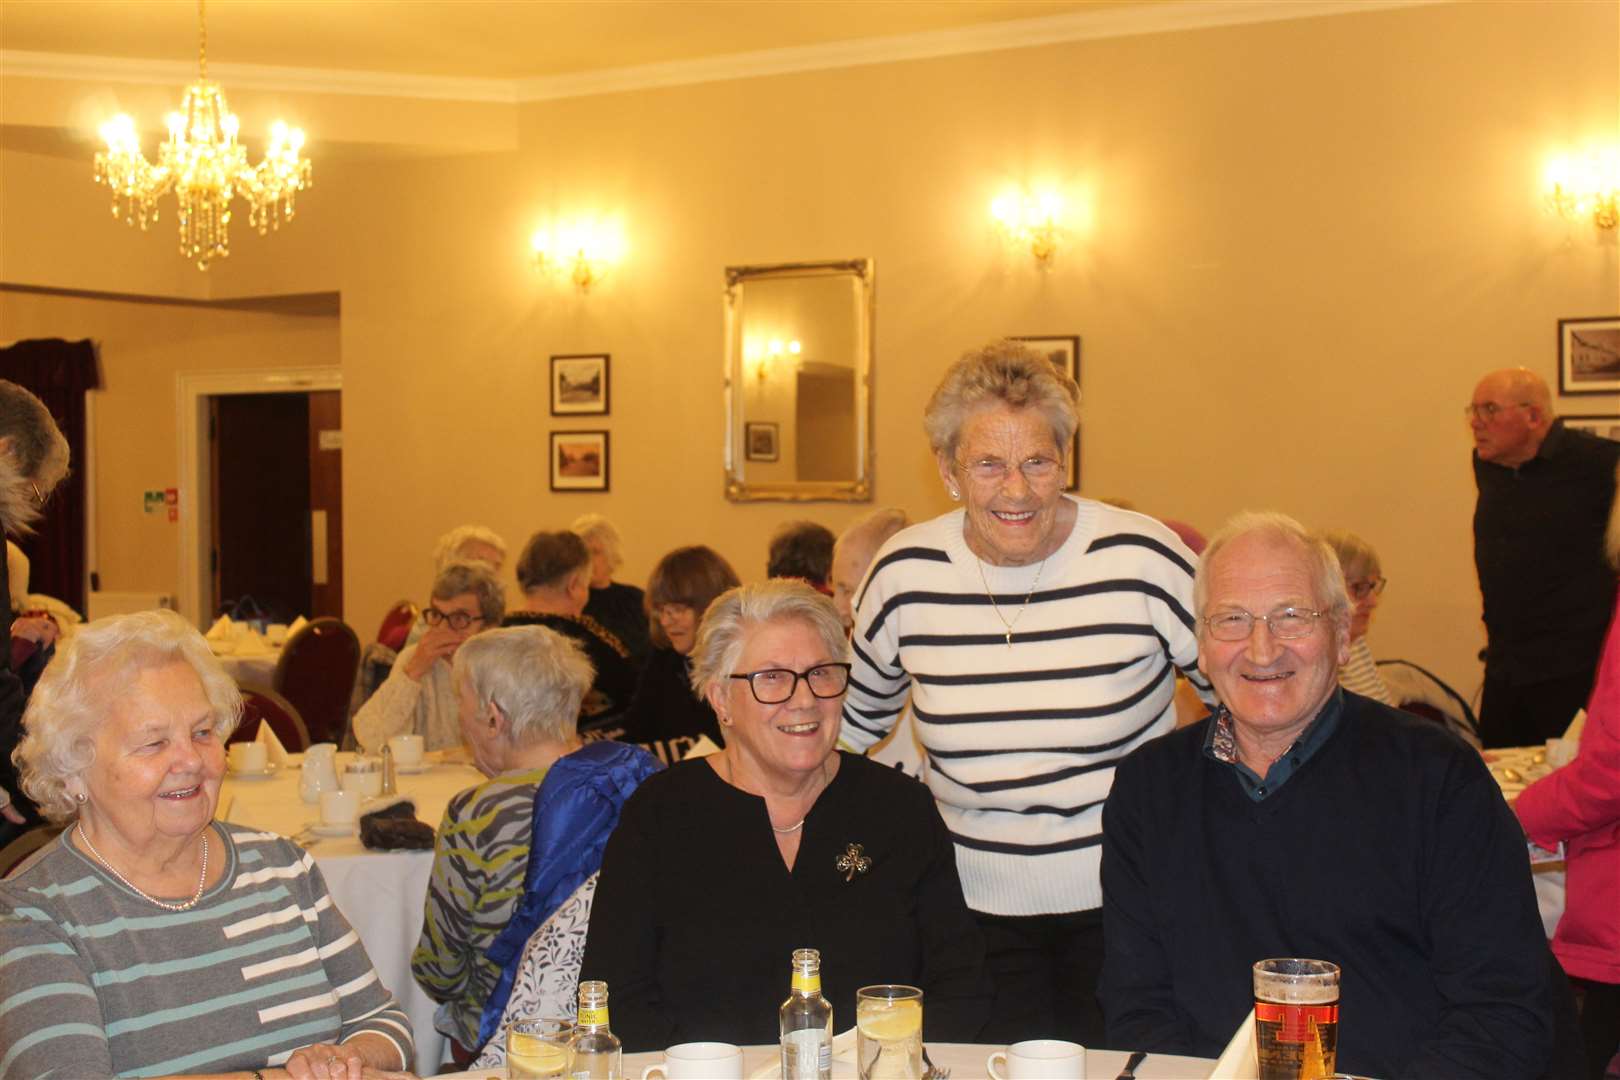 Elinor Strachan at Thursday's Age Concern party at the Kintore Arms, High Street, Inverurie. Picture: Griselda McGregor